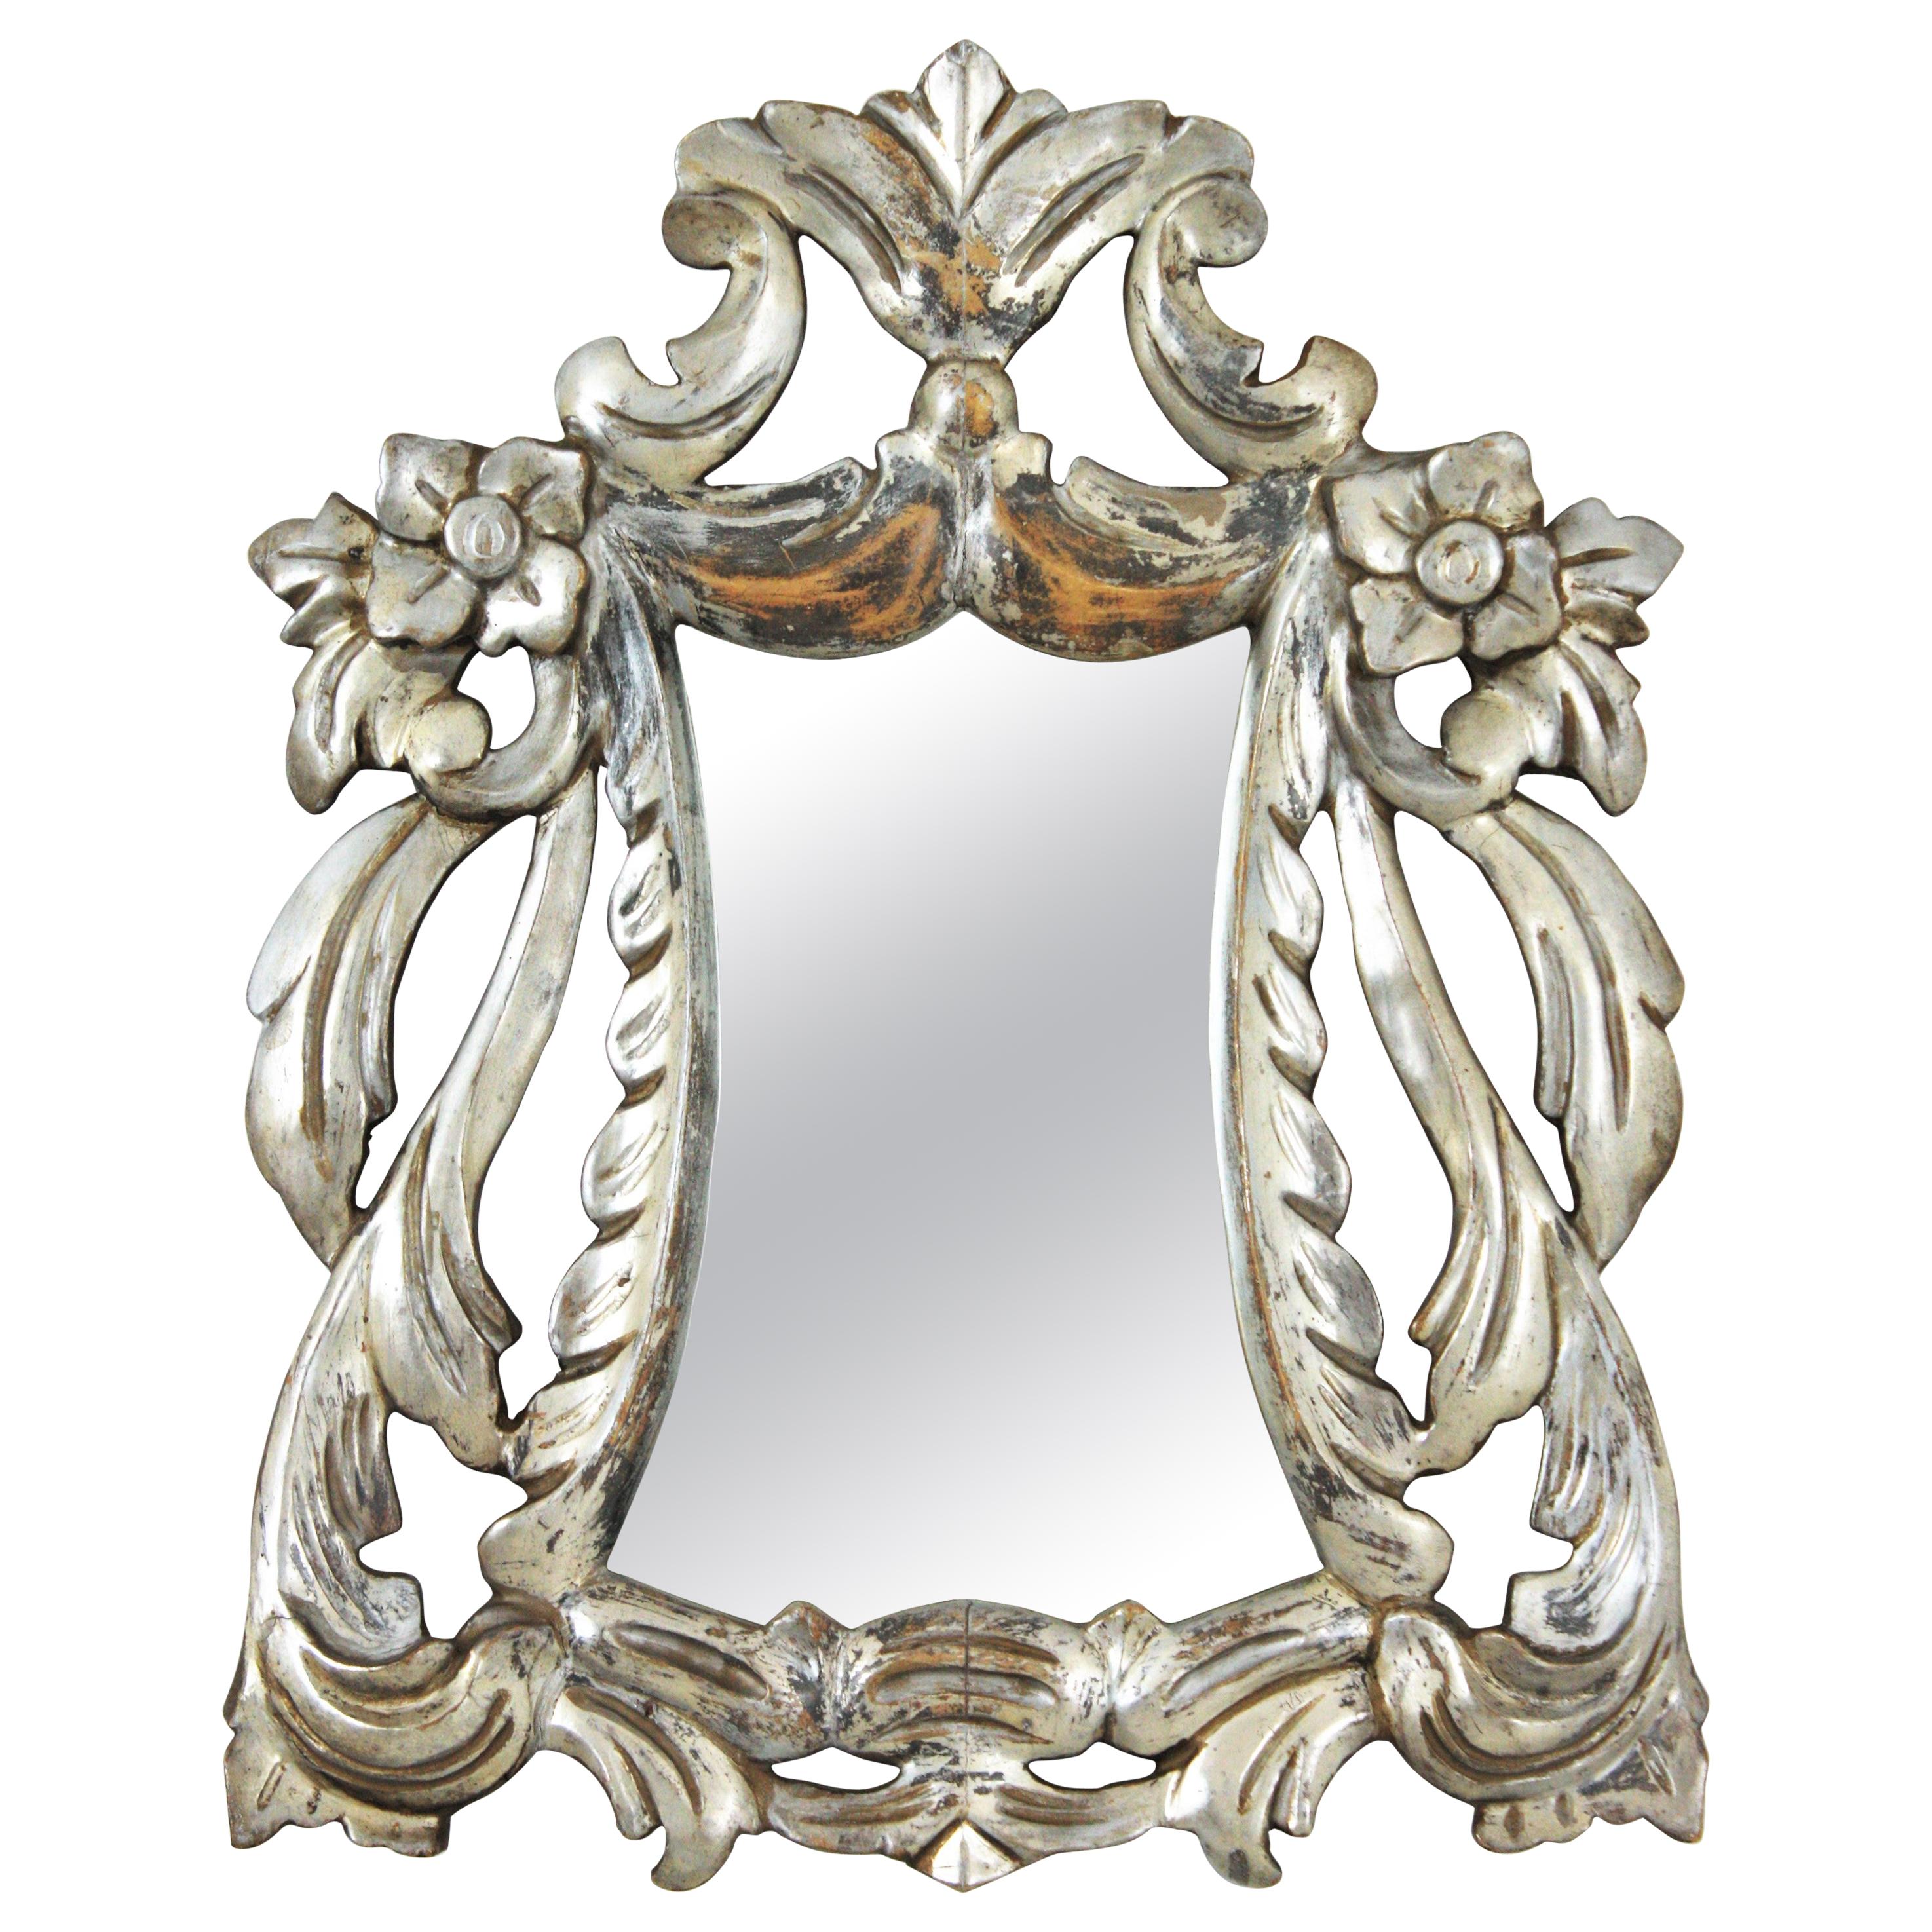 Spanish Silver Gilt Carved Wood Mirror